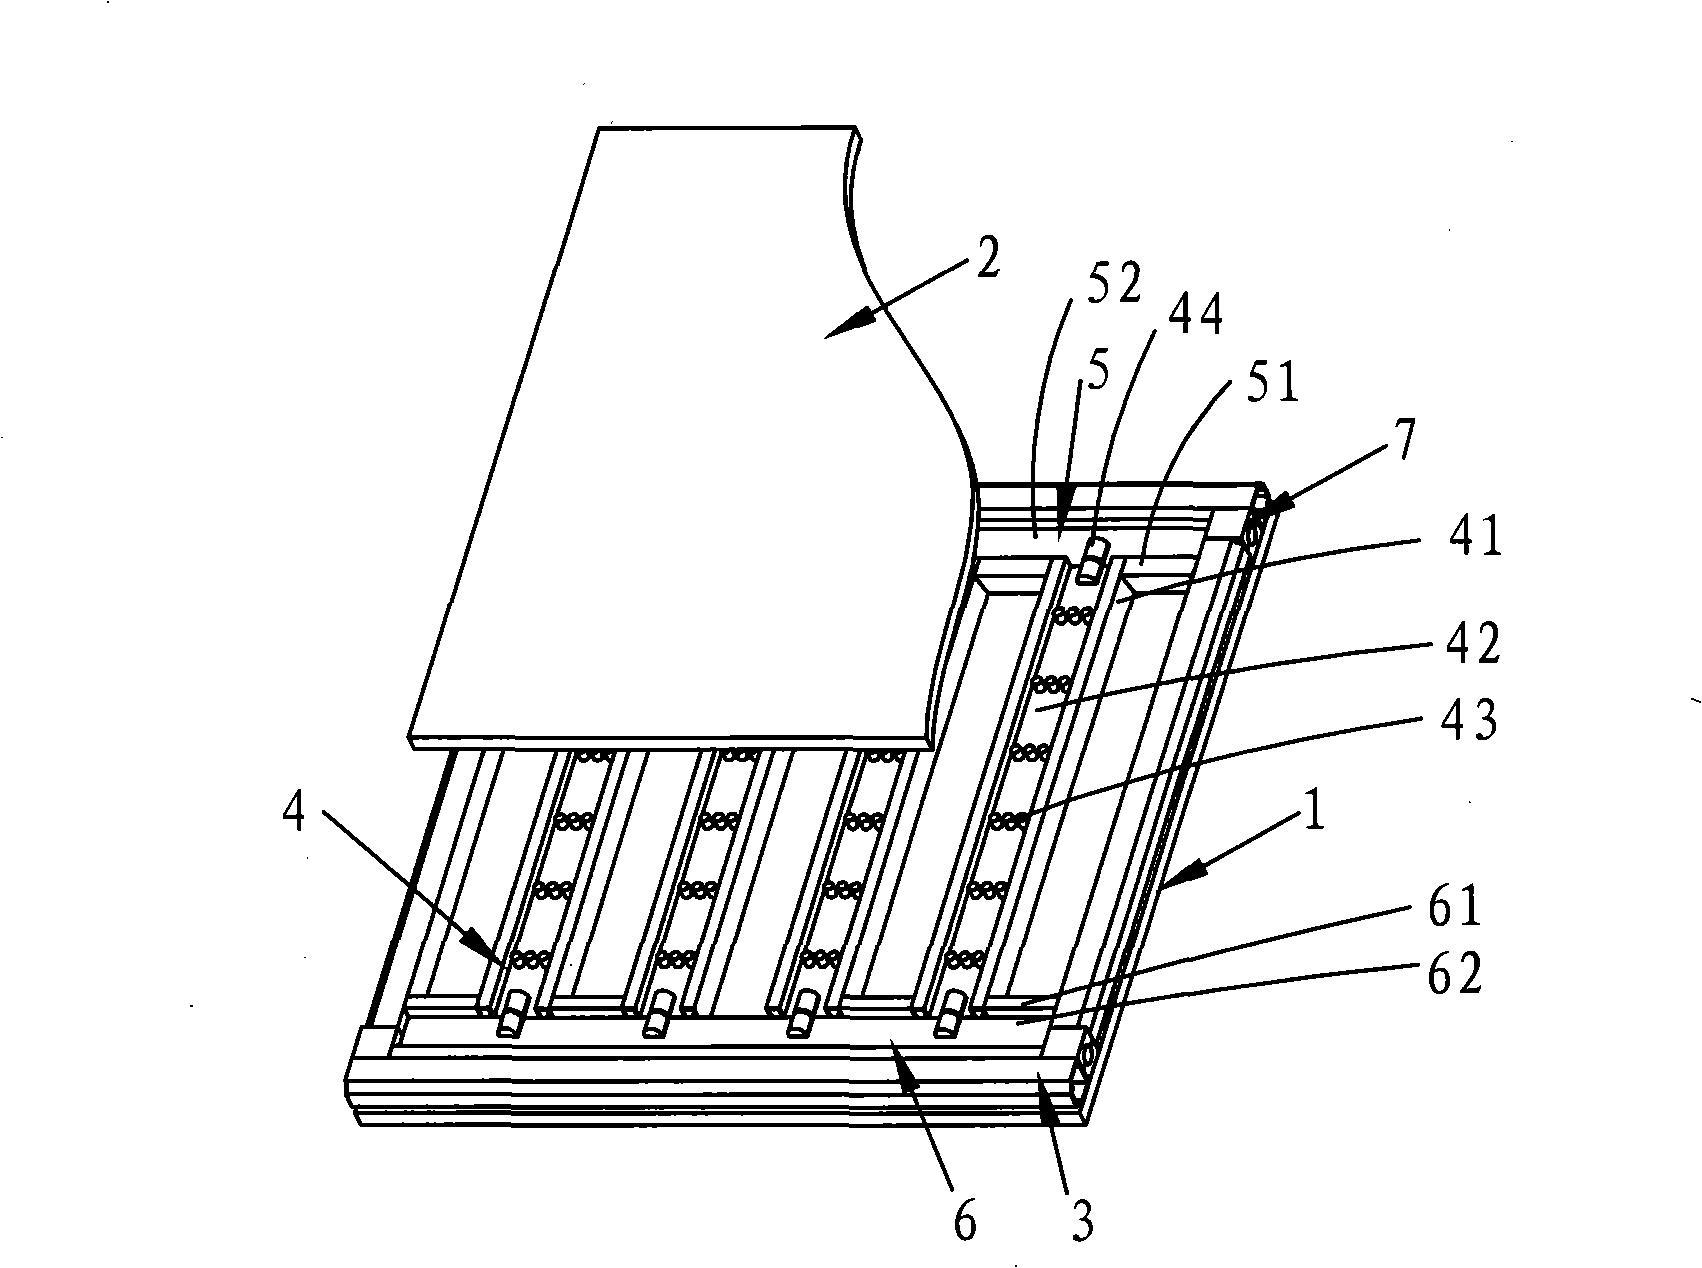 Glass curtain wall die set capable of displaying graph and text information